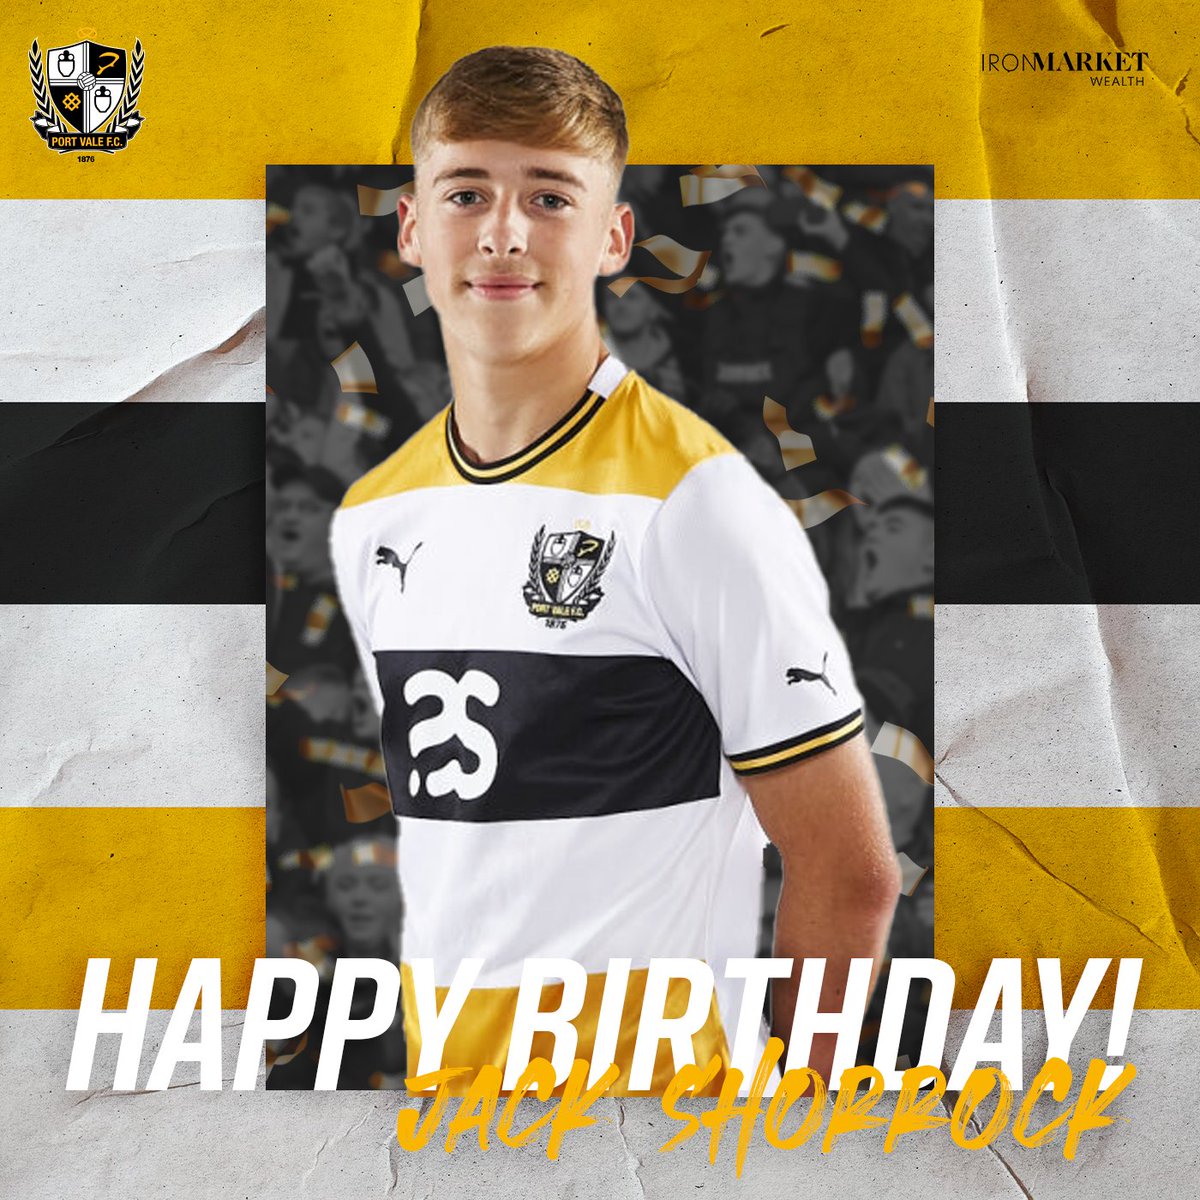 Happy 17th Birthday to our number 23, Jack Shorrock! 🎉 #PVFC | #UTV